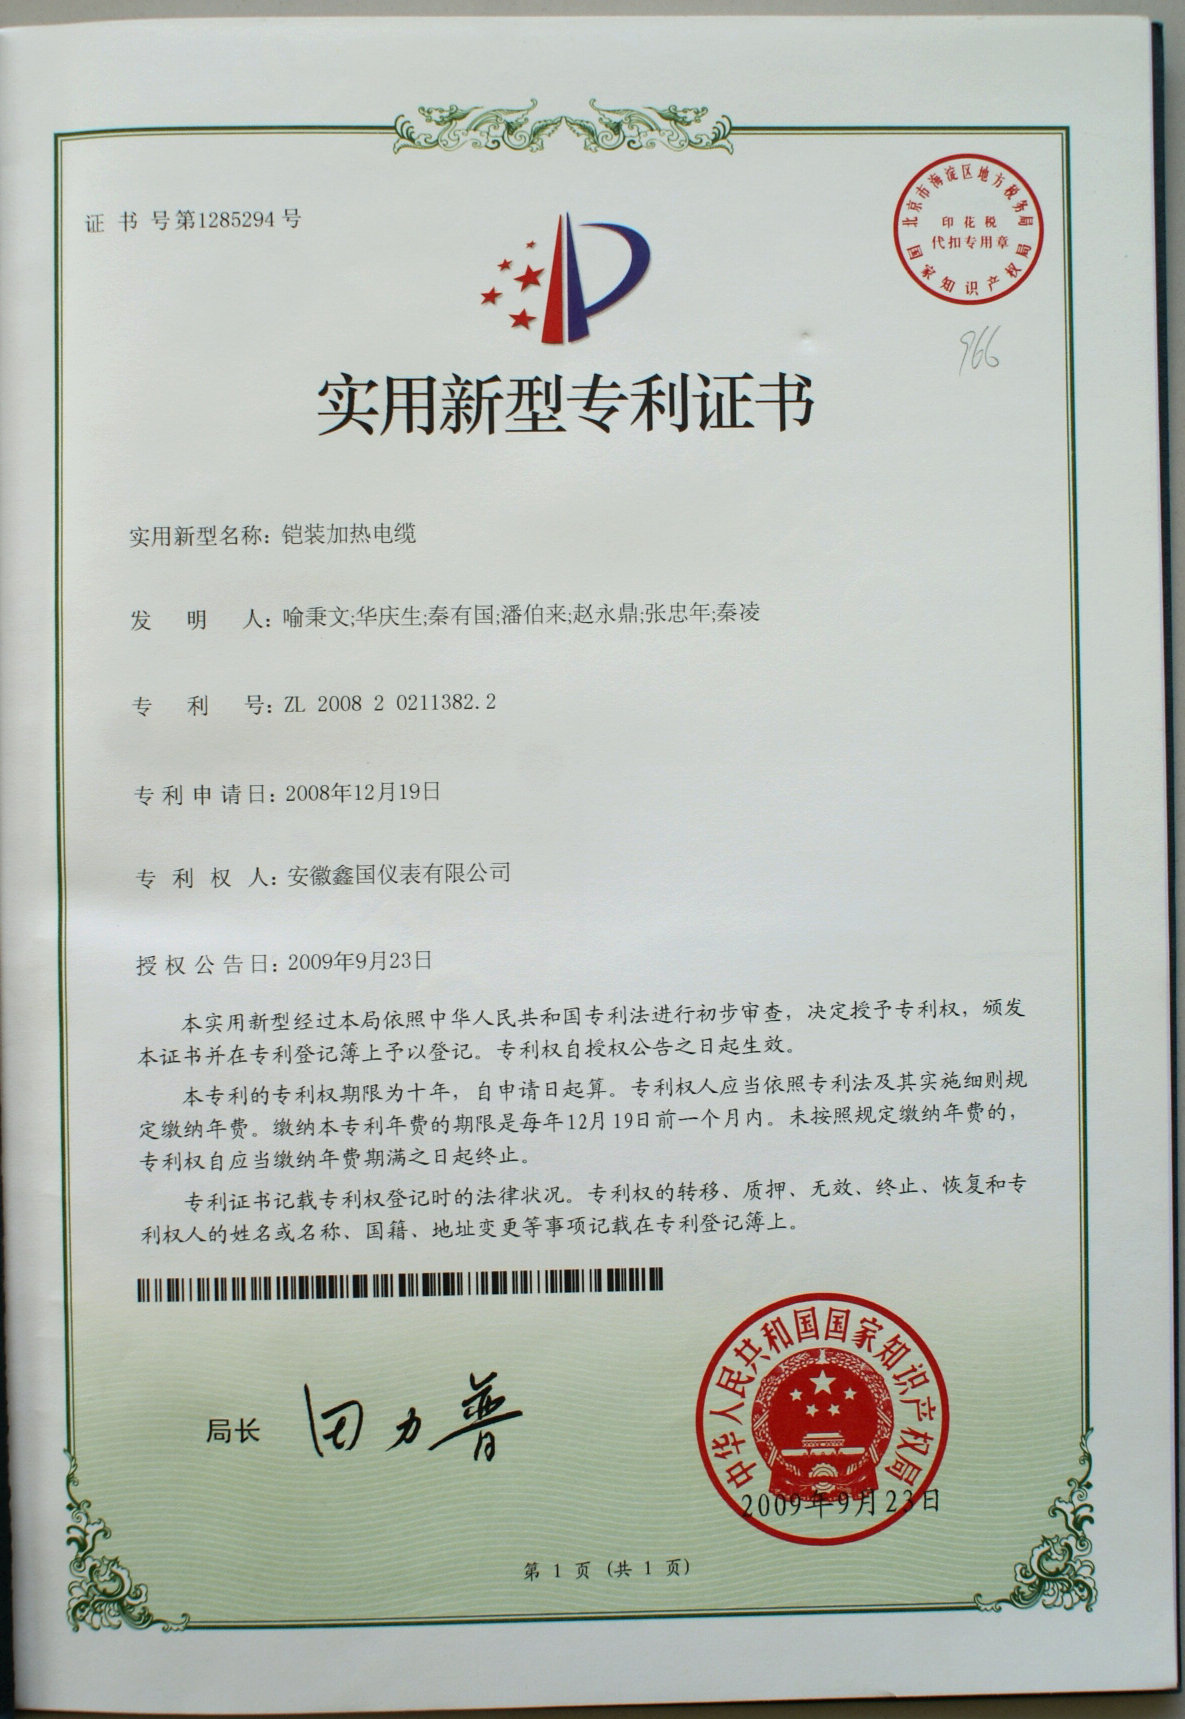 MI HEATING CABLE PATENT CERTIFICATE